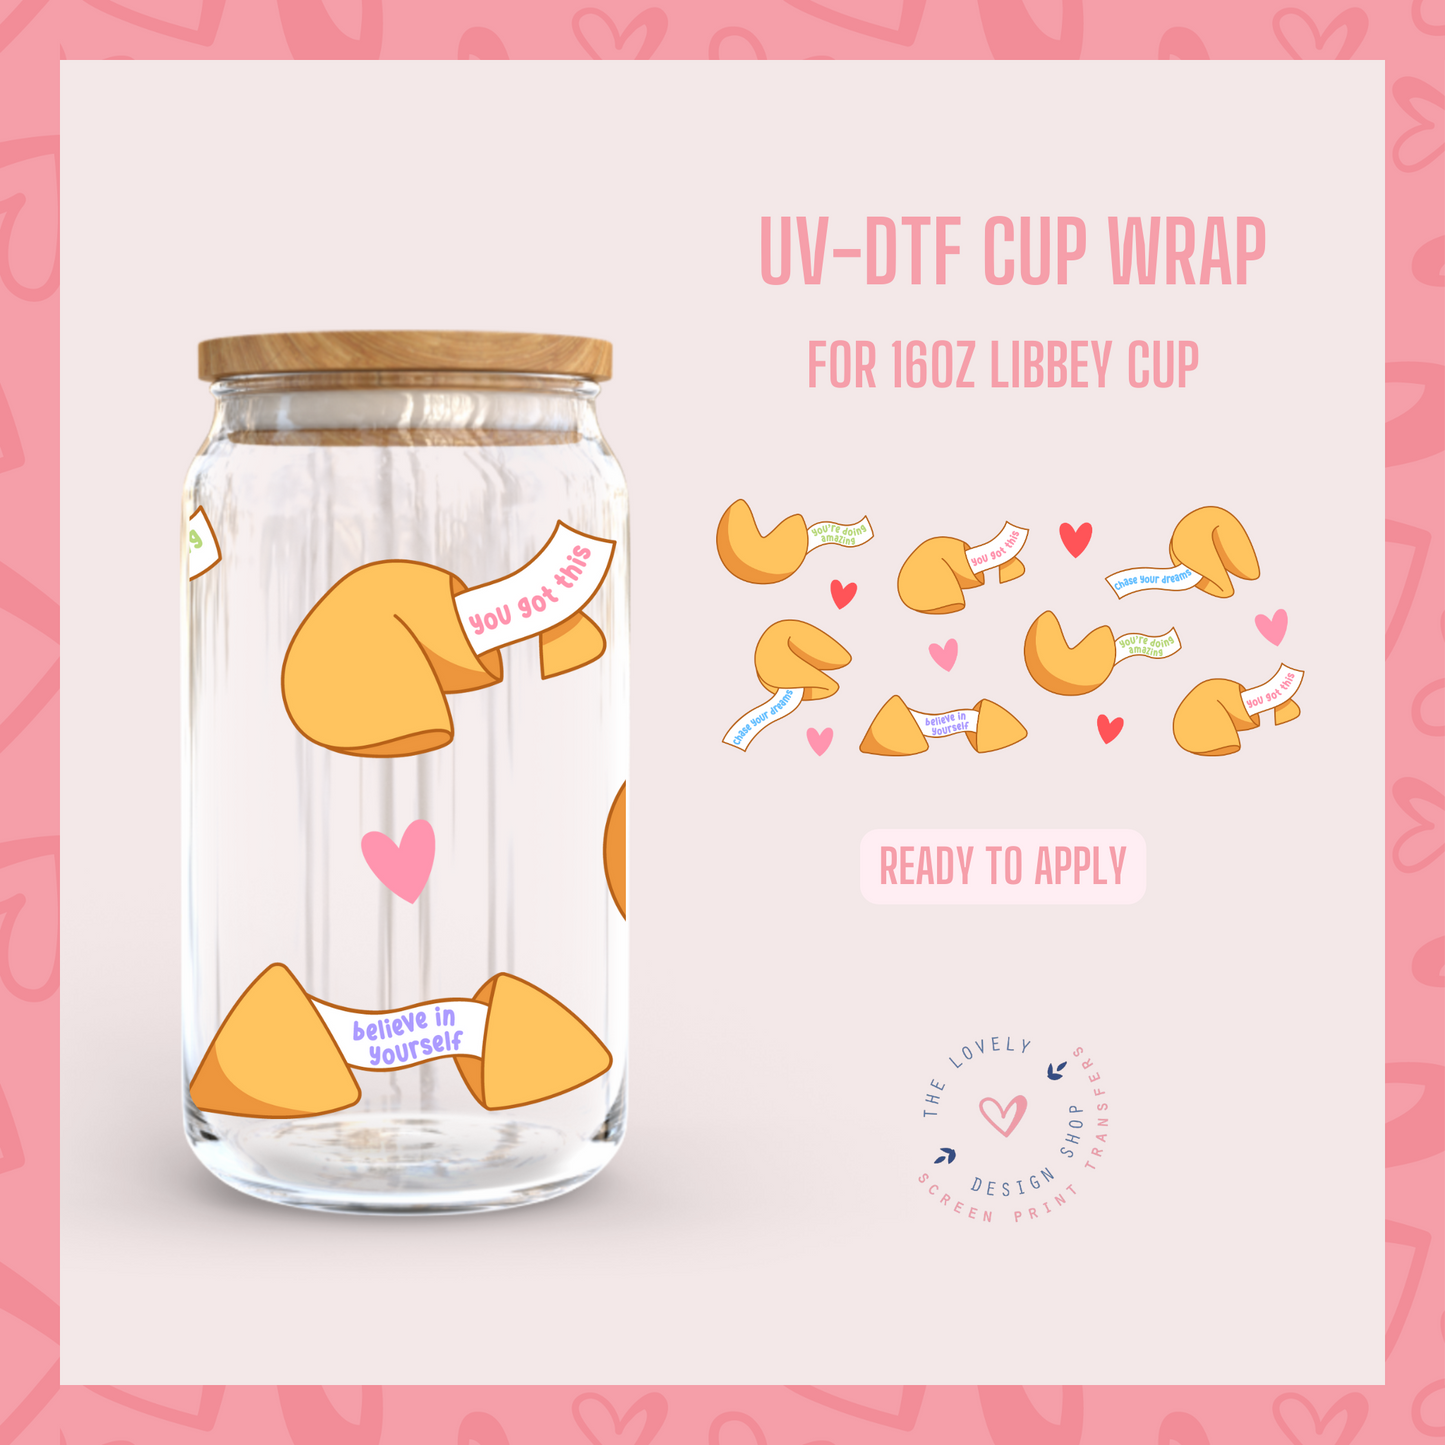 Fortune Cookie - UV DTF 16 oz Libbey Cup Wrap (Ready to Ship) Mar 19